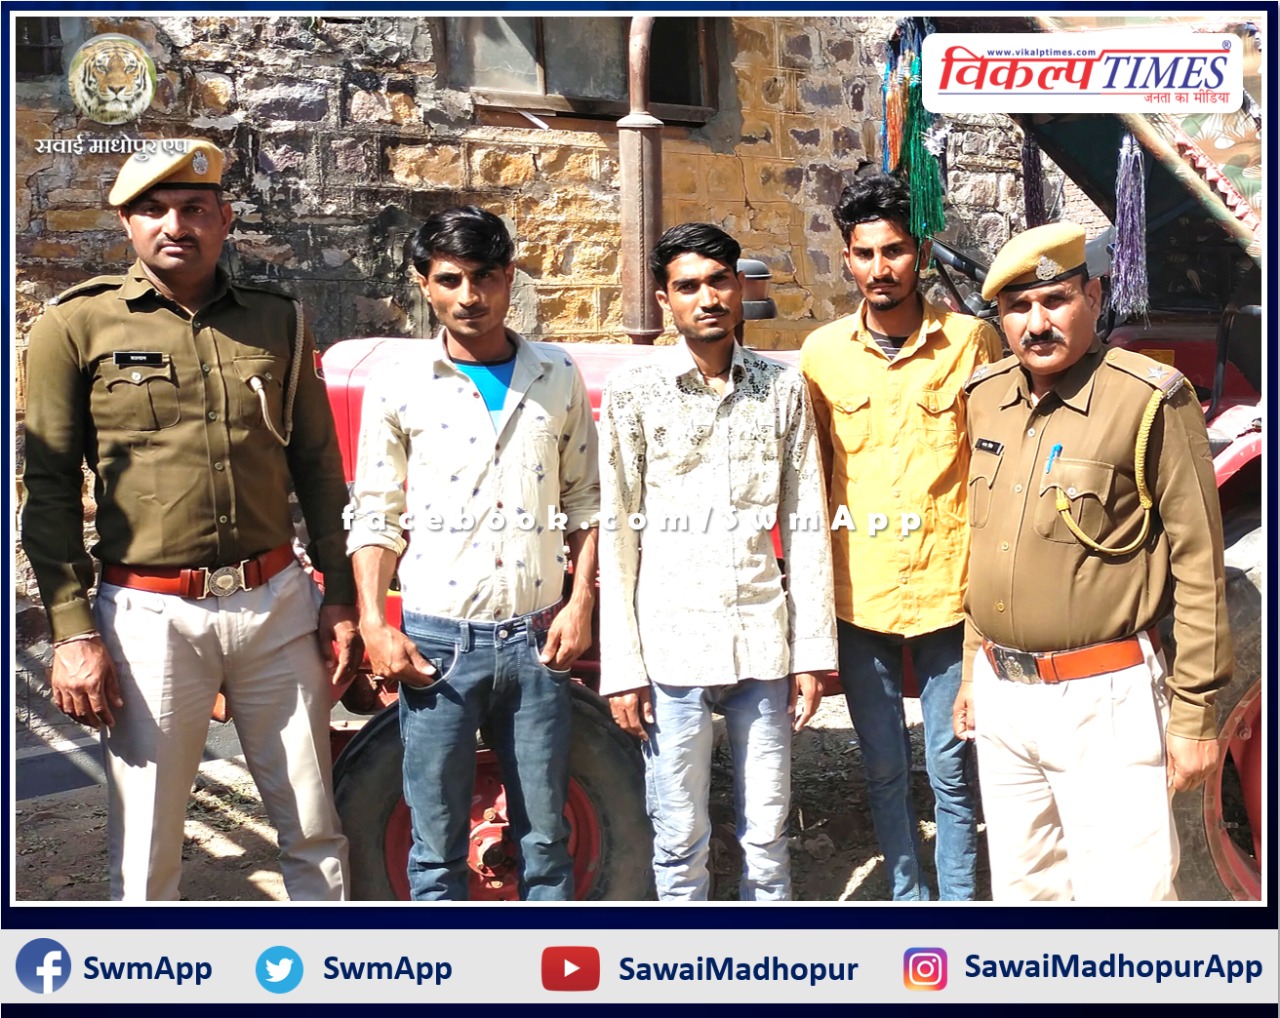 police arrested 3 accused for taking away tractor trolley filled with illegal gravel in khandar sawai madhopur